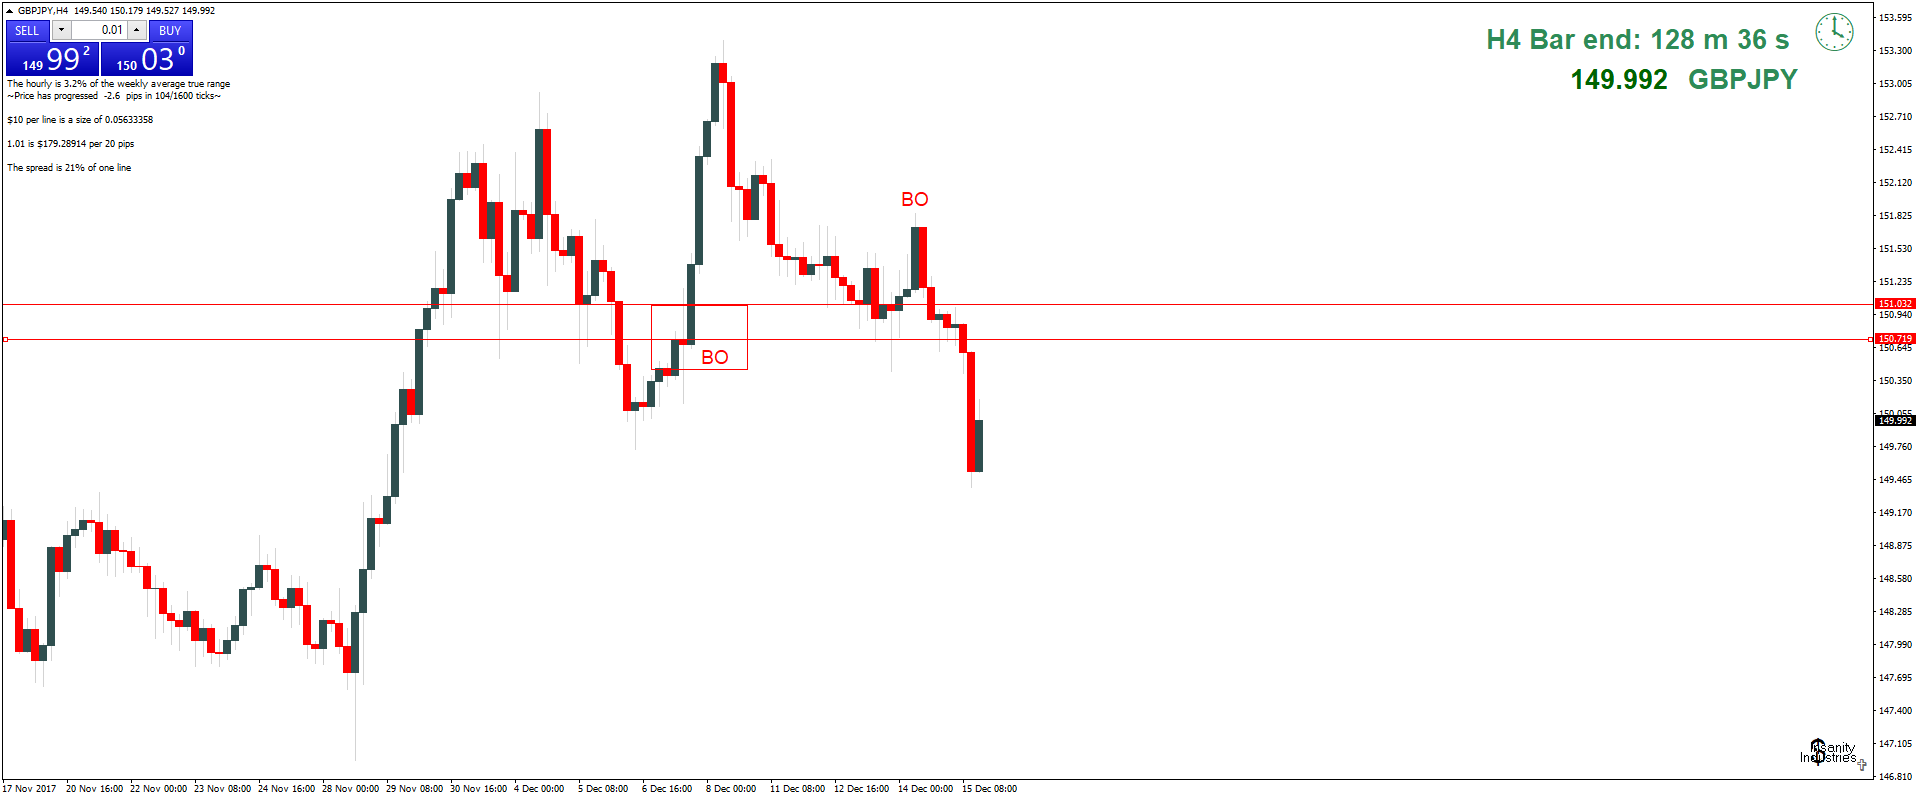 gbpjpy-h4-capital-city-markets-2.png